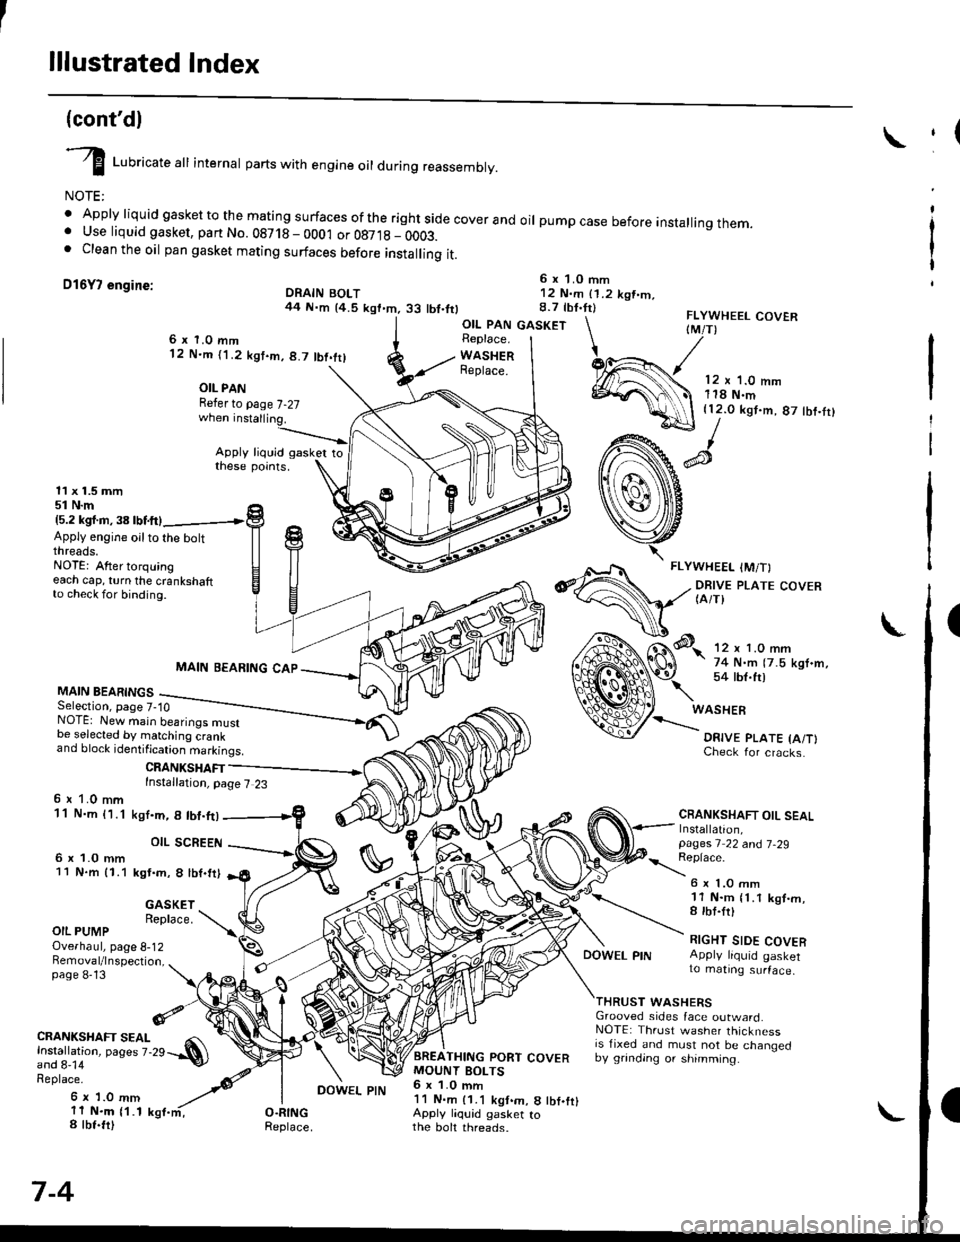 HONDA CIVIC 1996 6.G Workshop Manual lllustrated Index
(contdl
I Luoricate att internal parts with engine oil during reassembly.
NOTE:
 Apply liquid gasket to the mating surfaces ofthe rightside coverand oil pumpcase before installingt